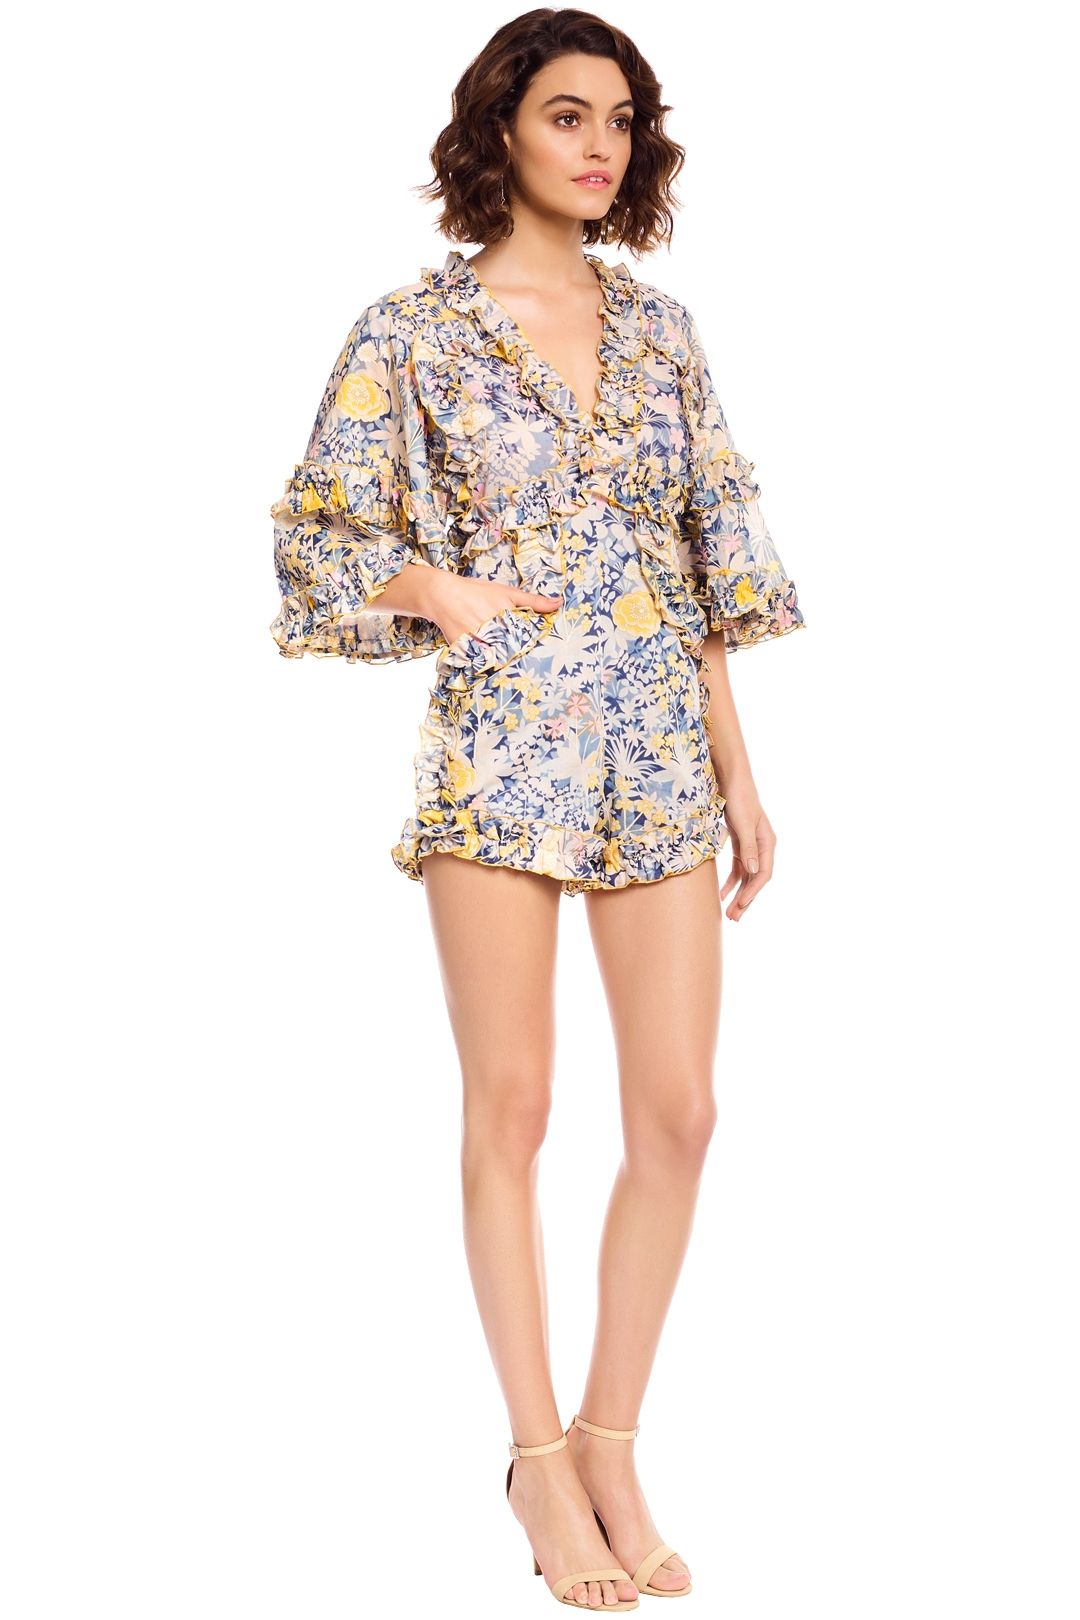 Alice McCall - Choose Me Playsuit - Gold Bloom - Side